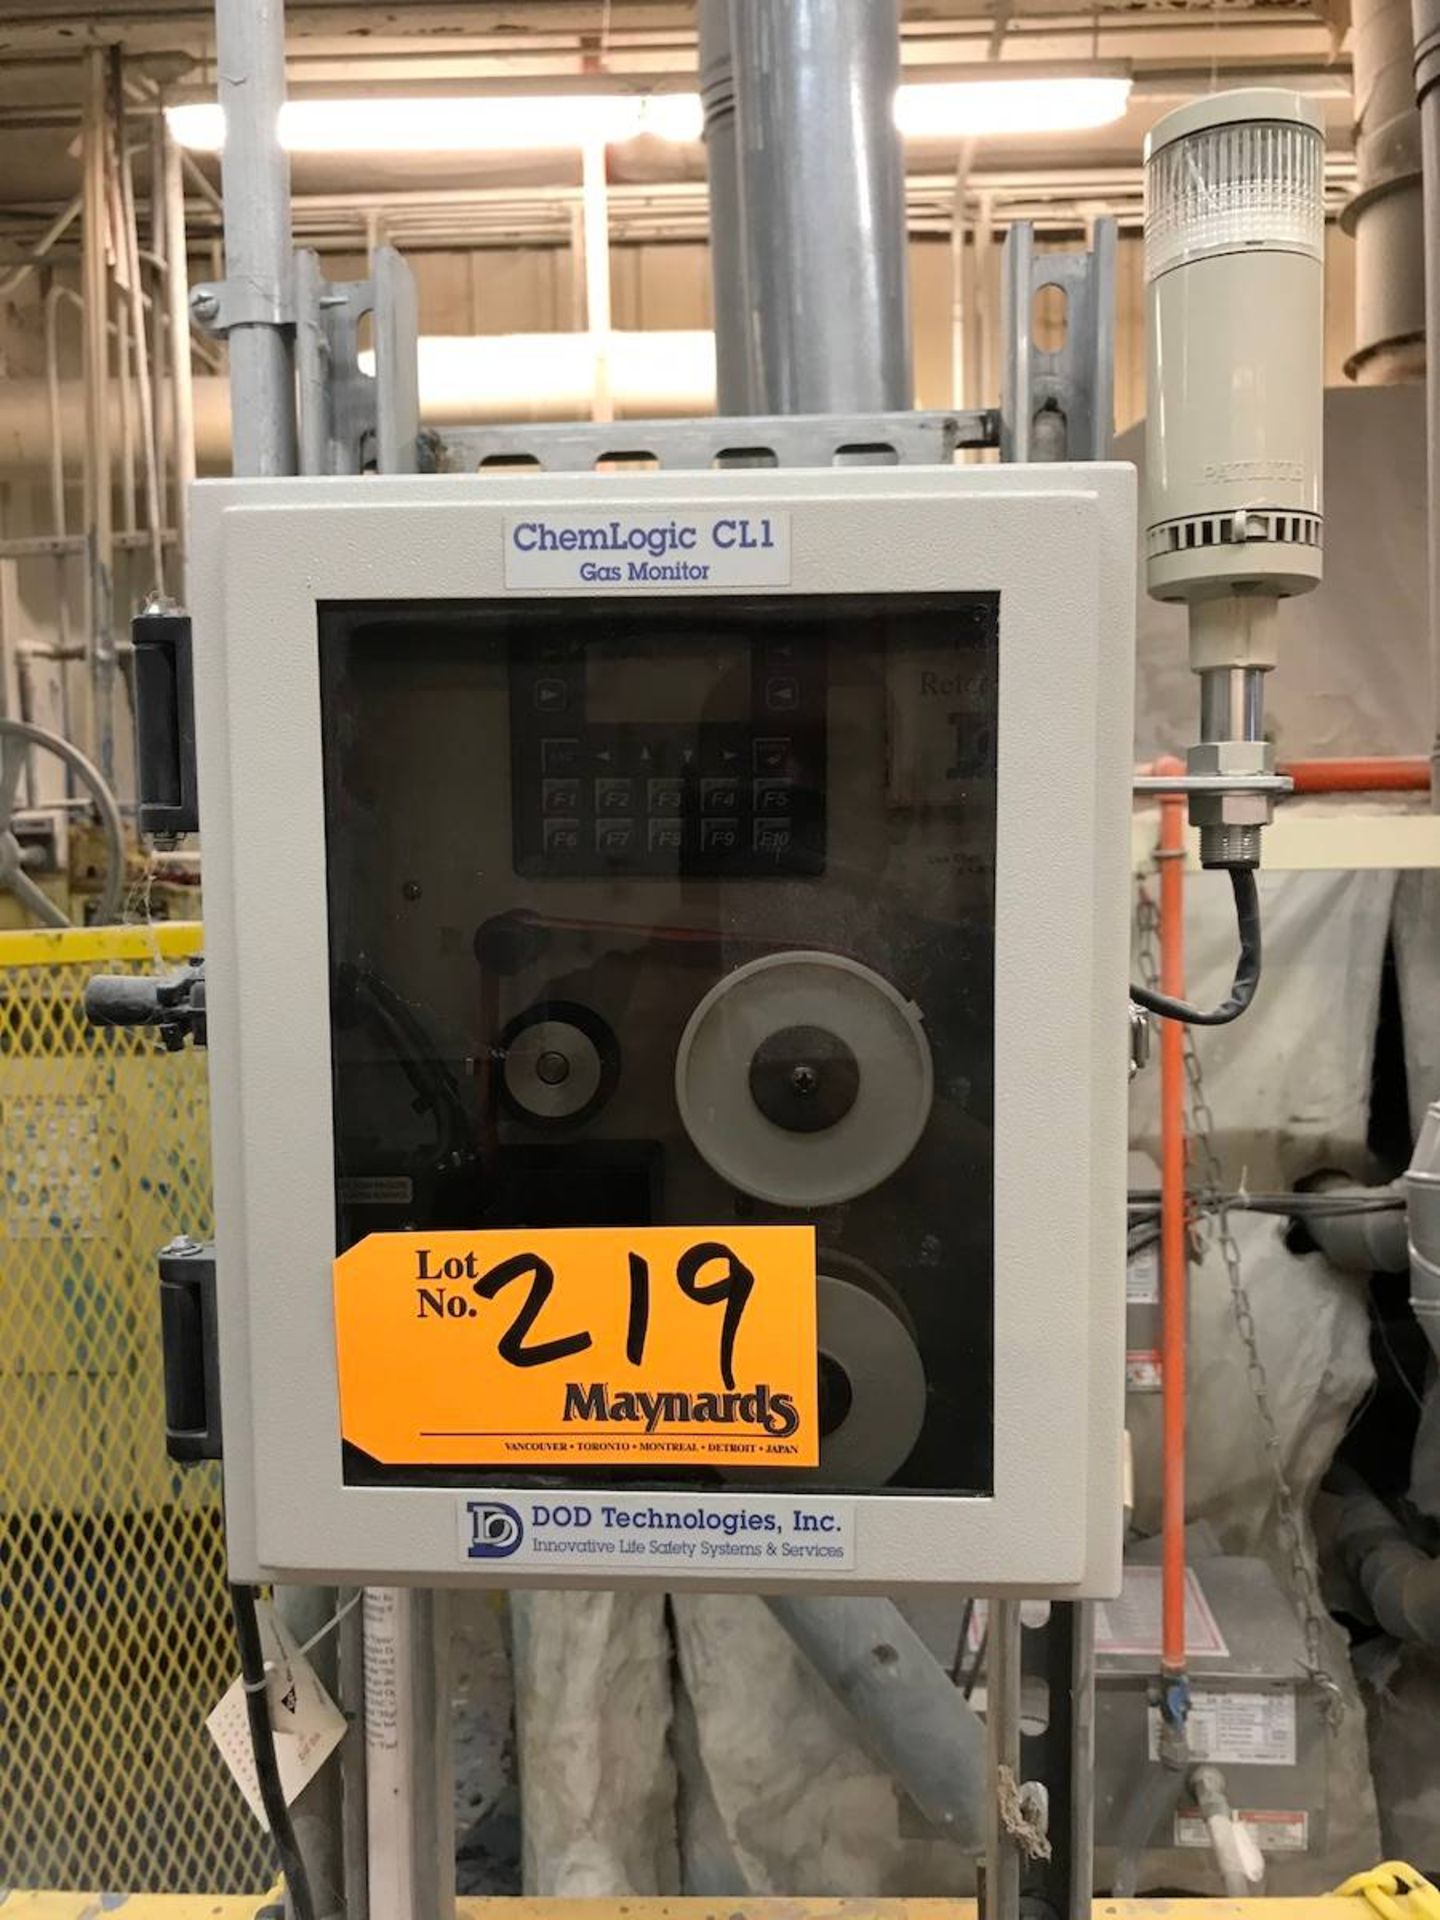 ChemLogic CL1 Gas Monitor